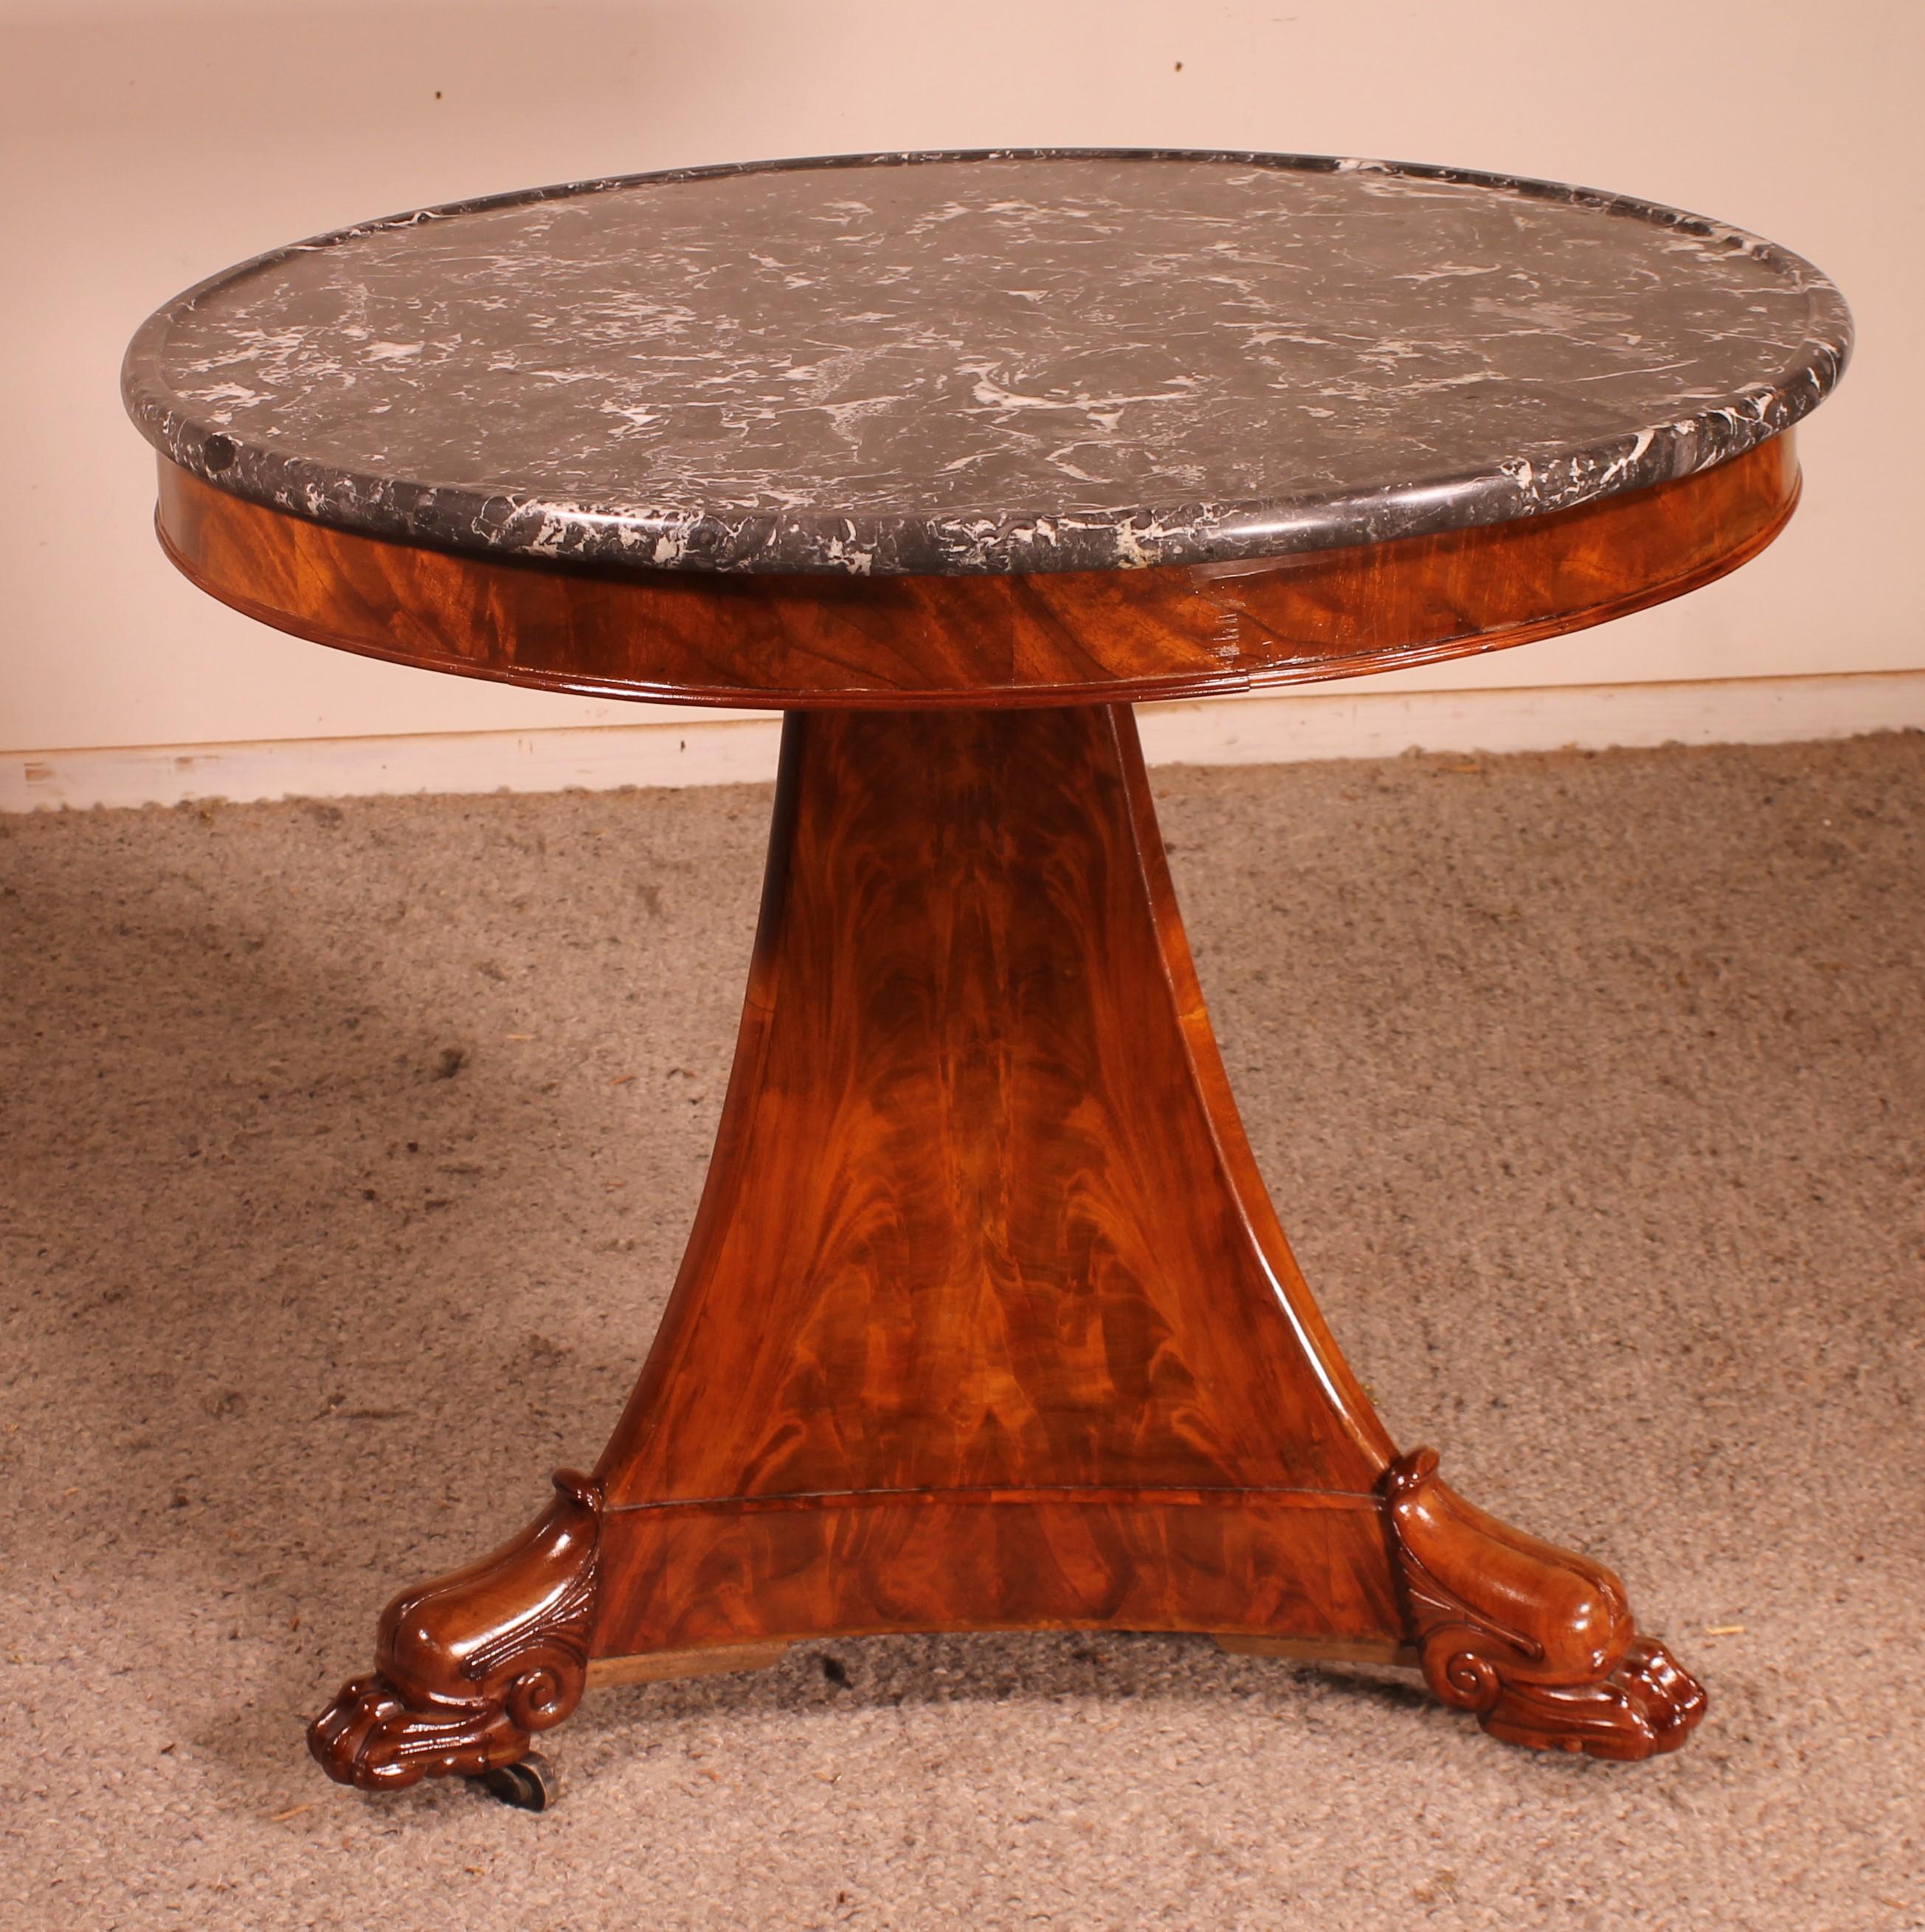 Superb empire pedestal table with its Saint-Anne marble
Pedestal table or center table with a pyramidal base ending with claw feet simulating dolphin heads

Very beautiful original Saint-Anne marble in perfect condition.
The base has a very